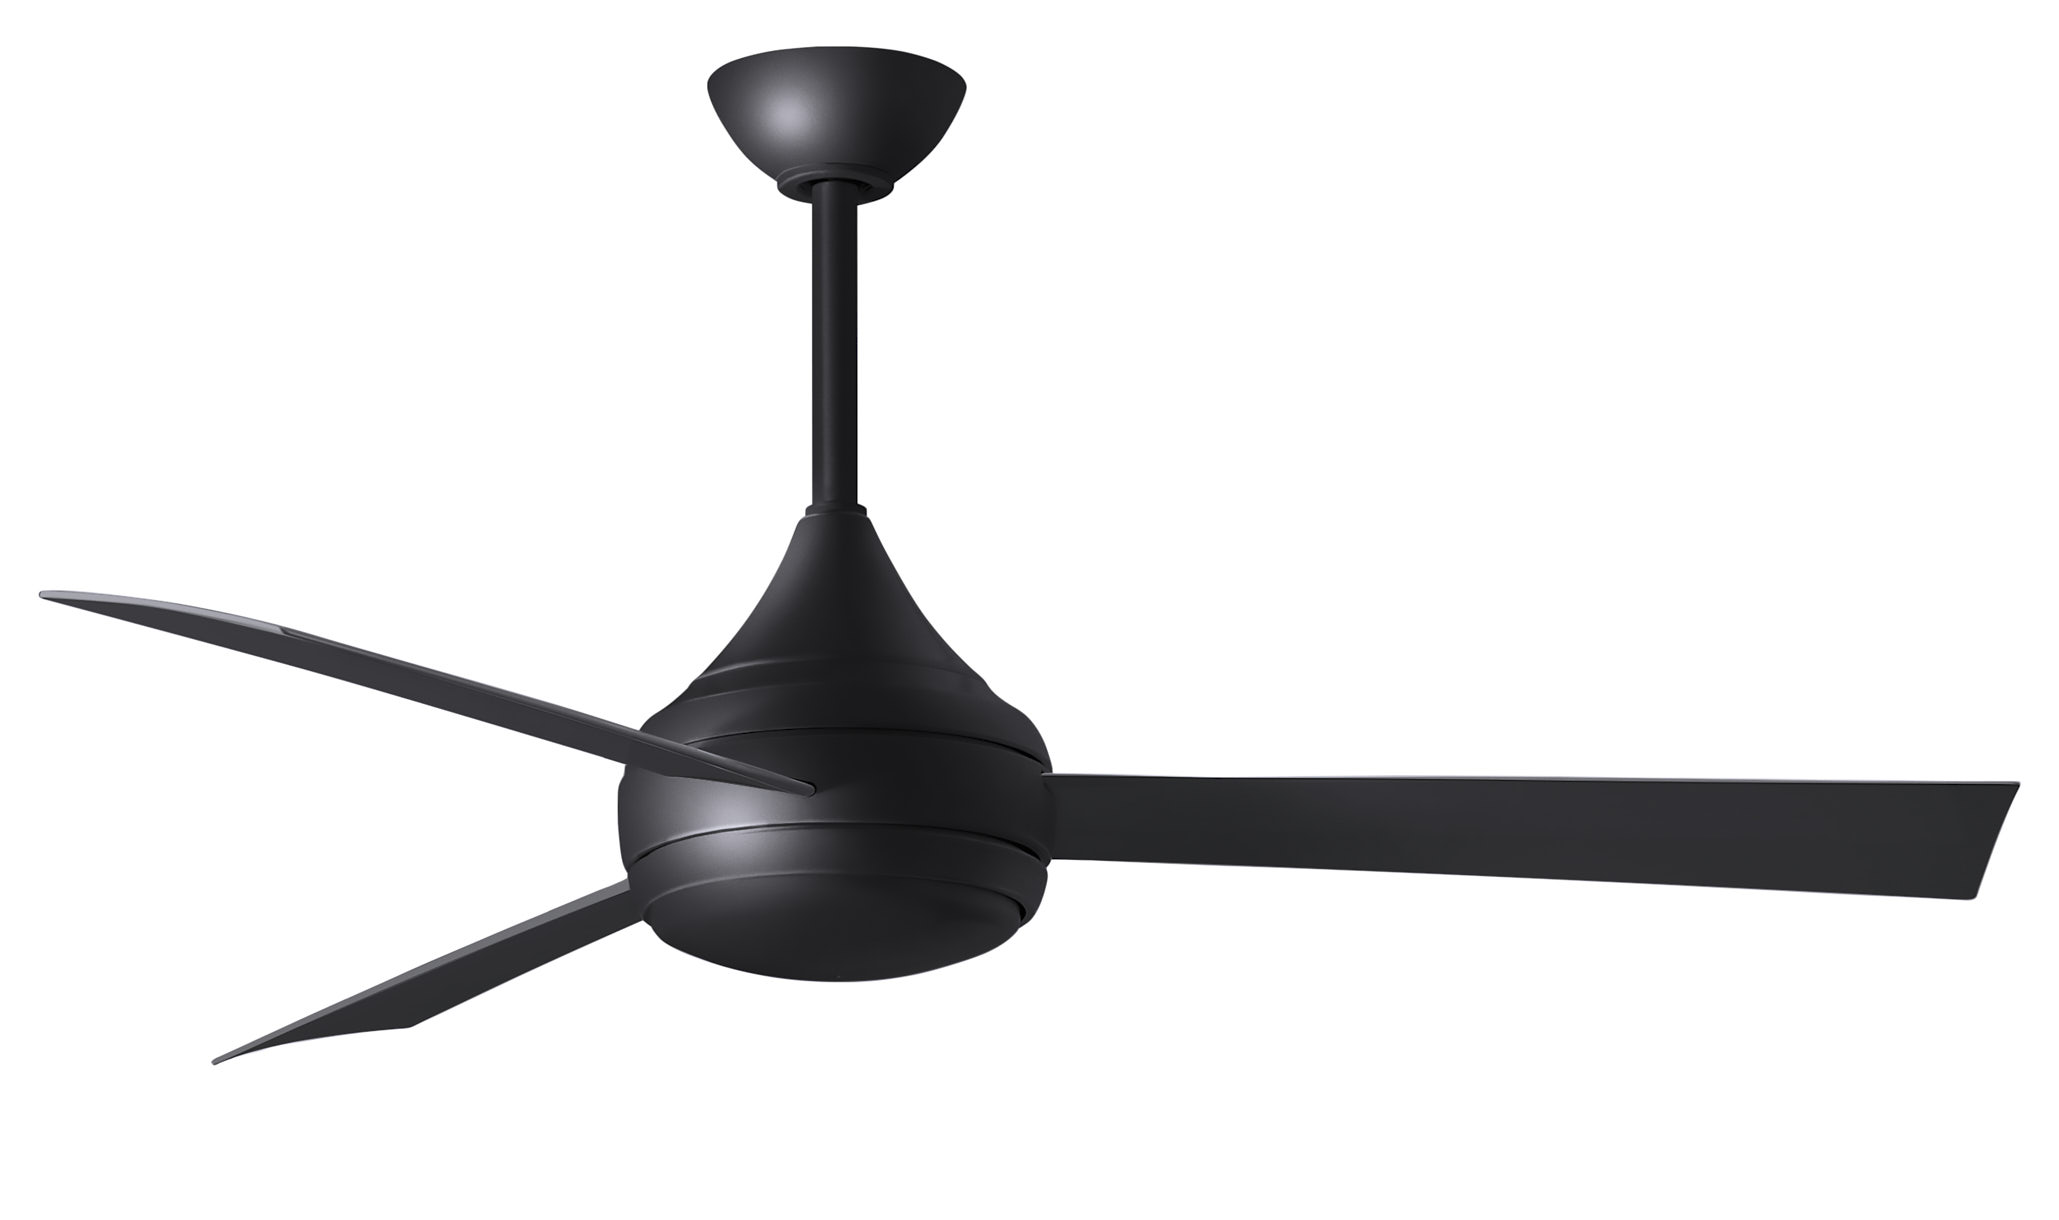 Donaire ceiling fan in Matte Black with Black blades with light cap manufactured by Matthews Fan Company.